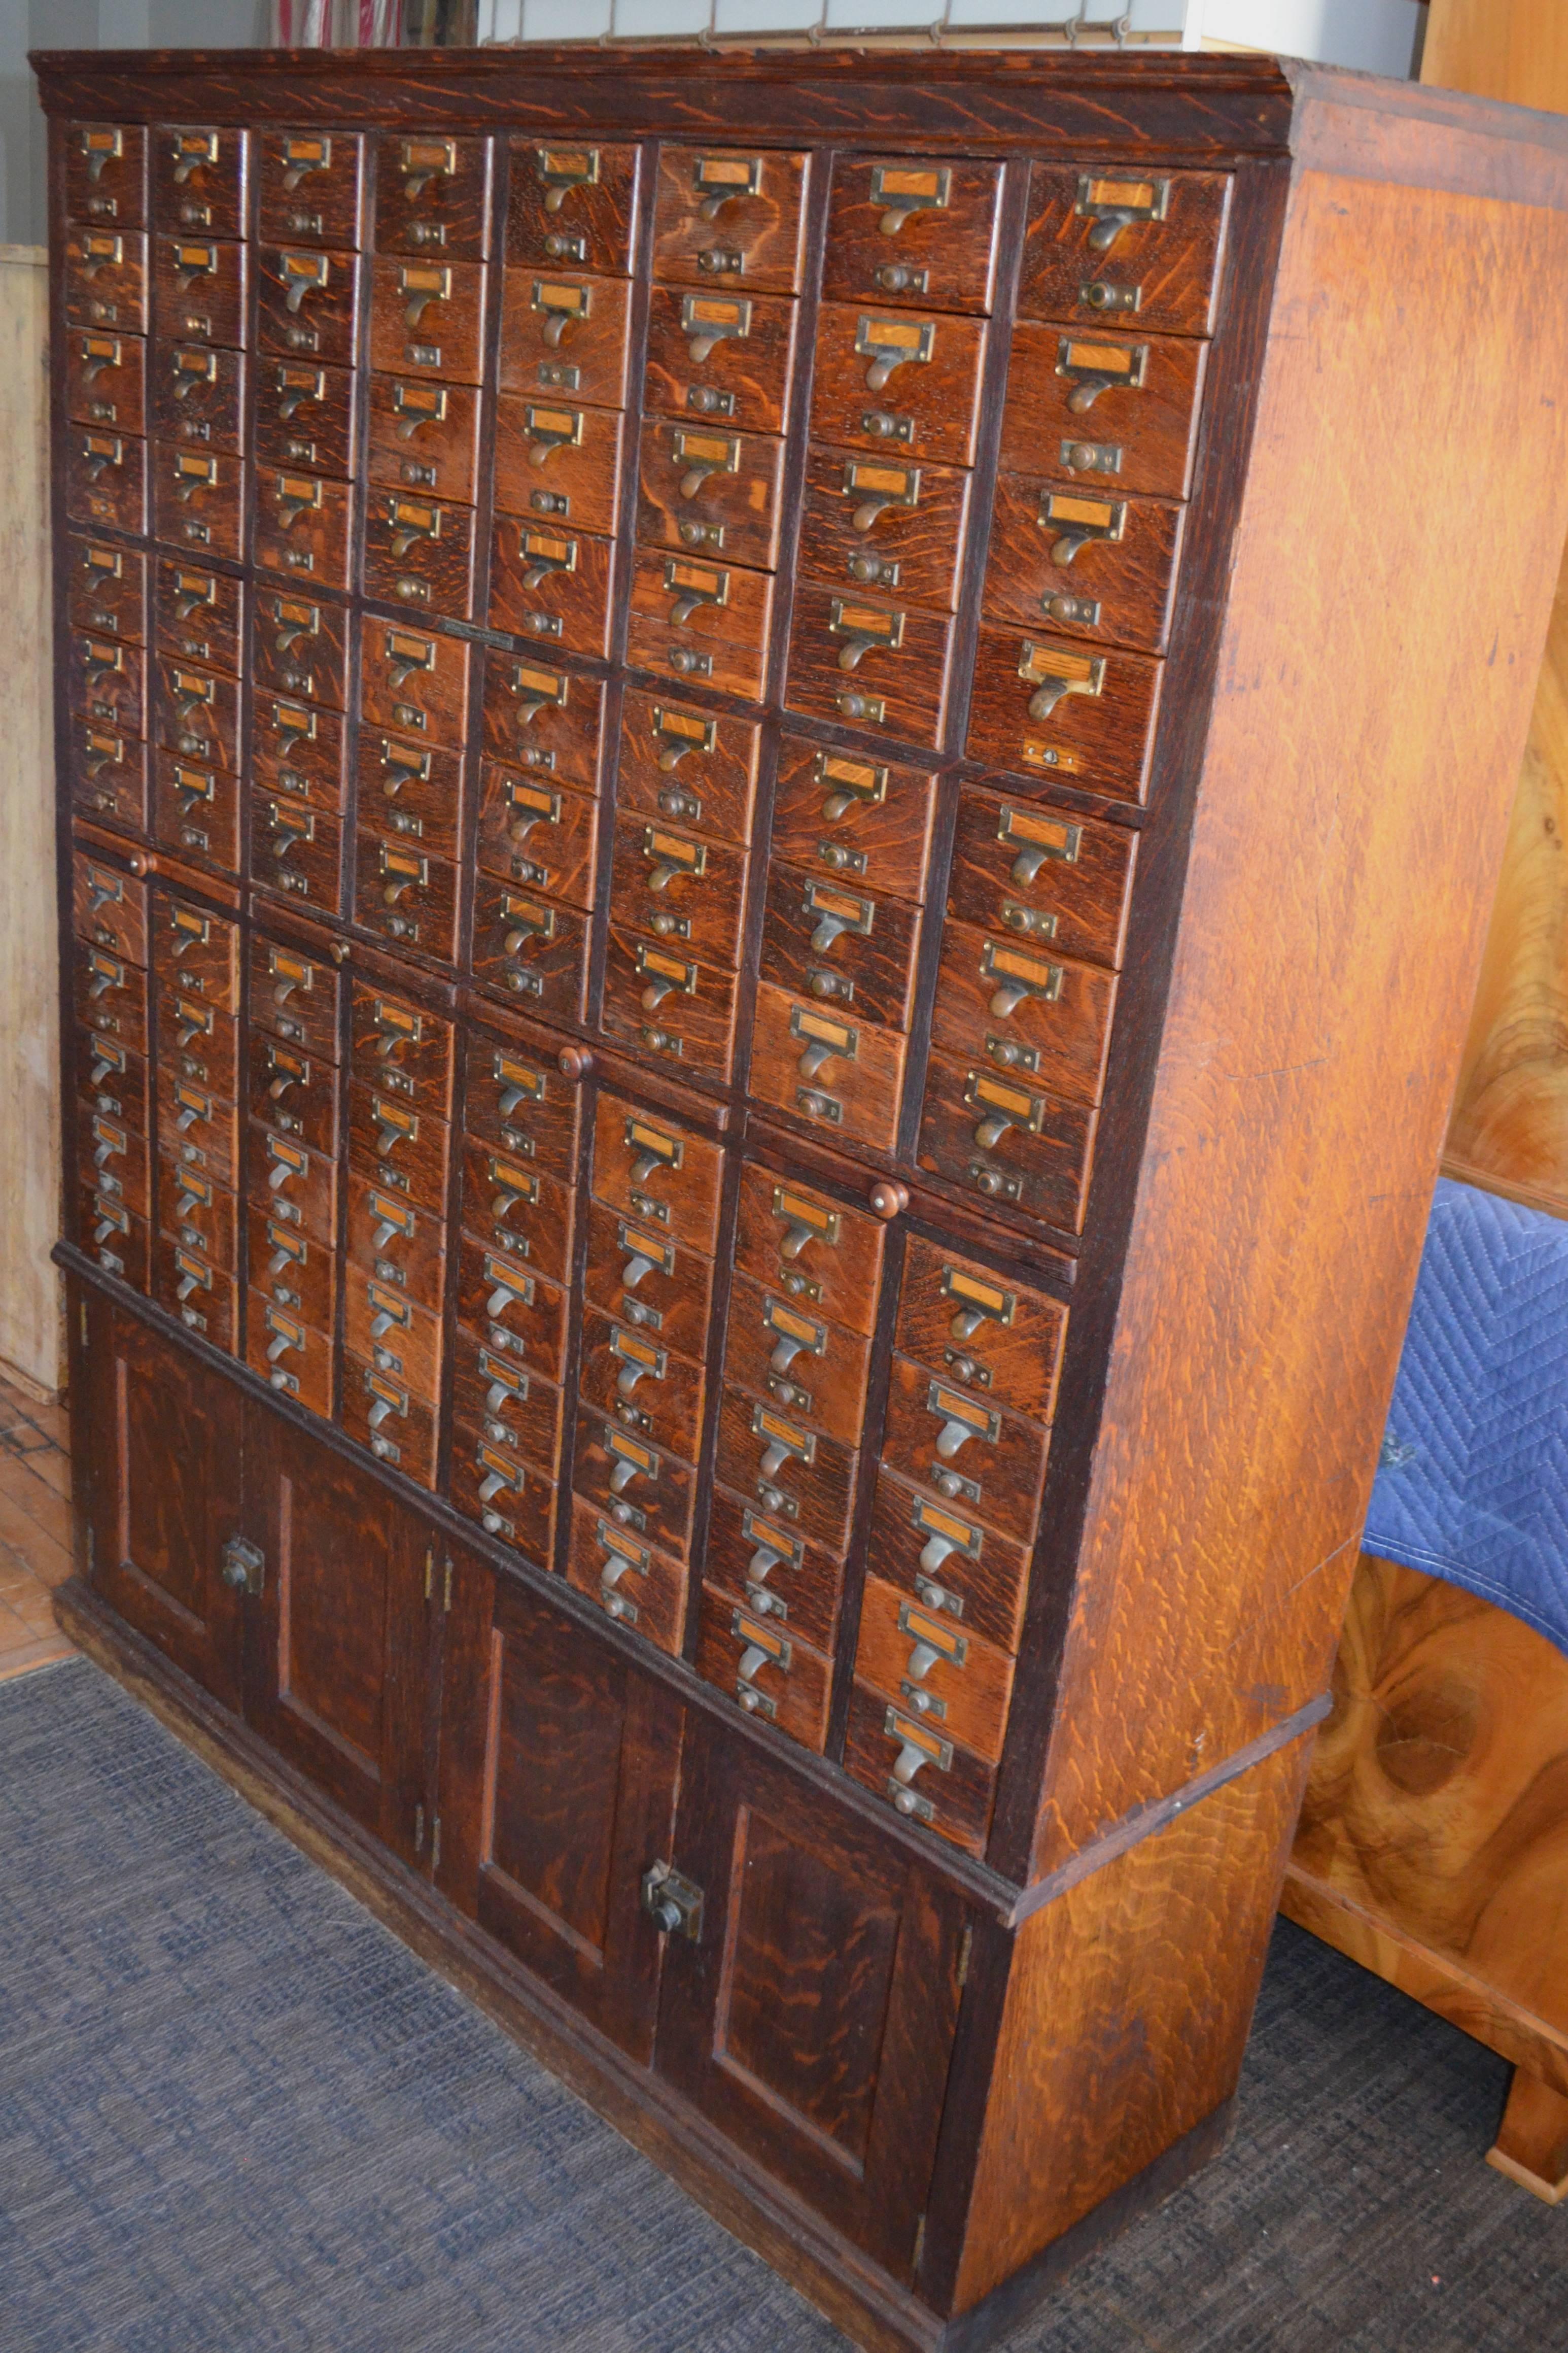 American Craftsman Card Catalog File Cabinet from Chicago Library, Solid Oak, Early 20th Century